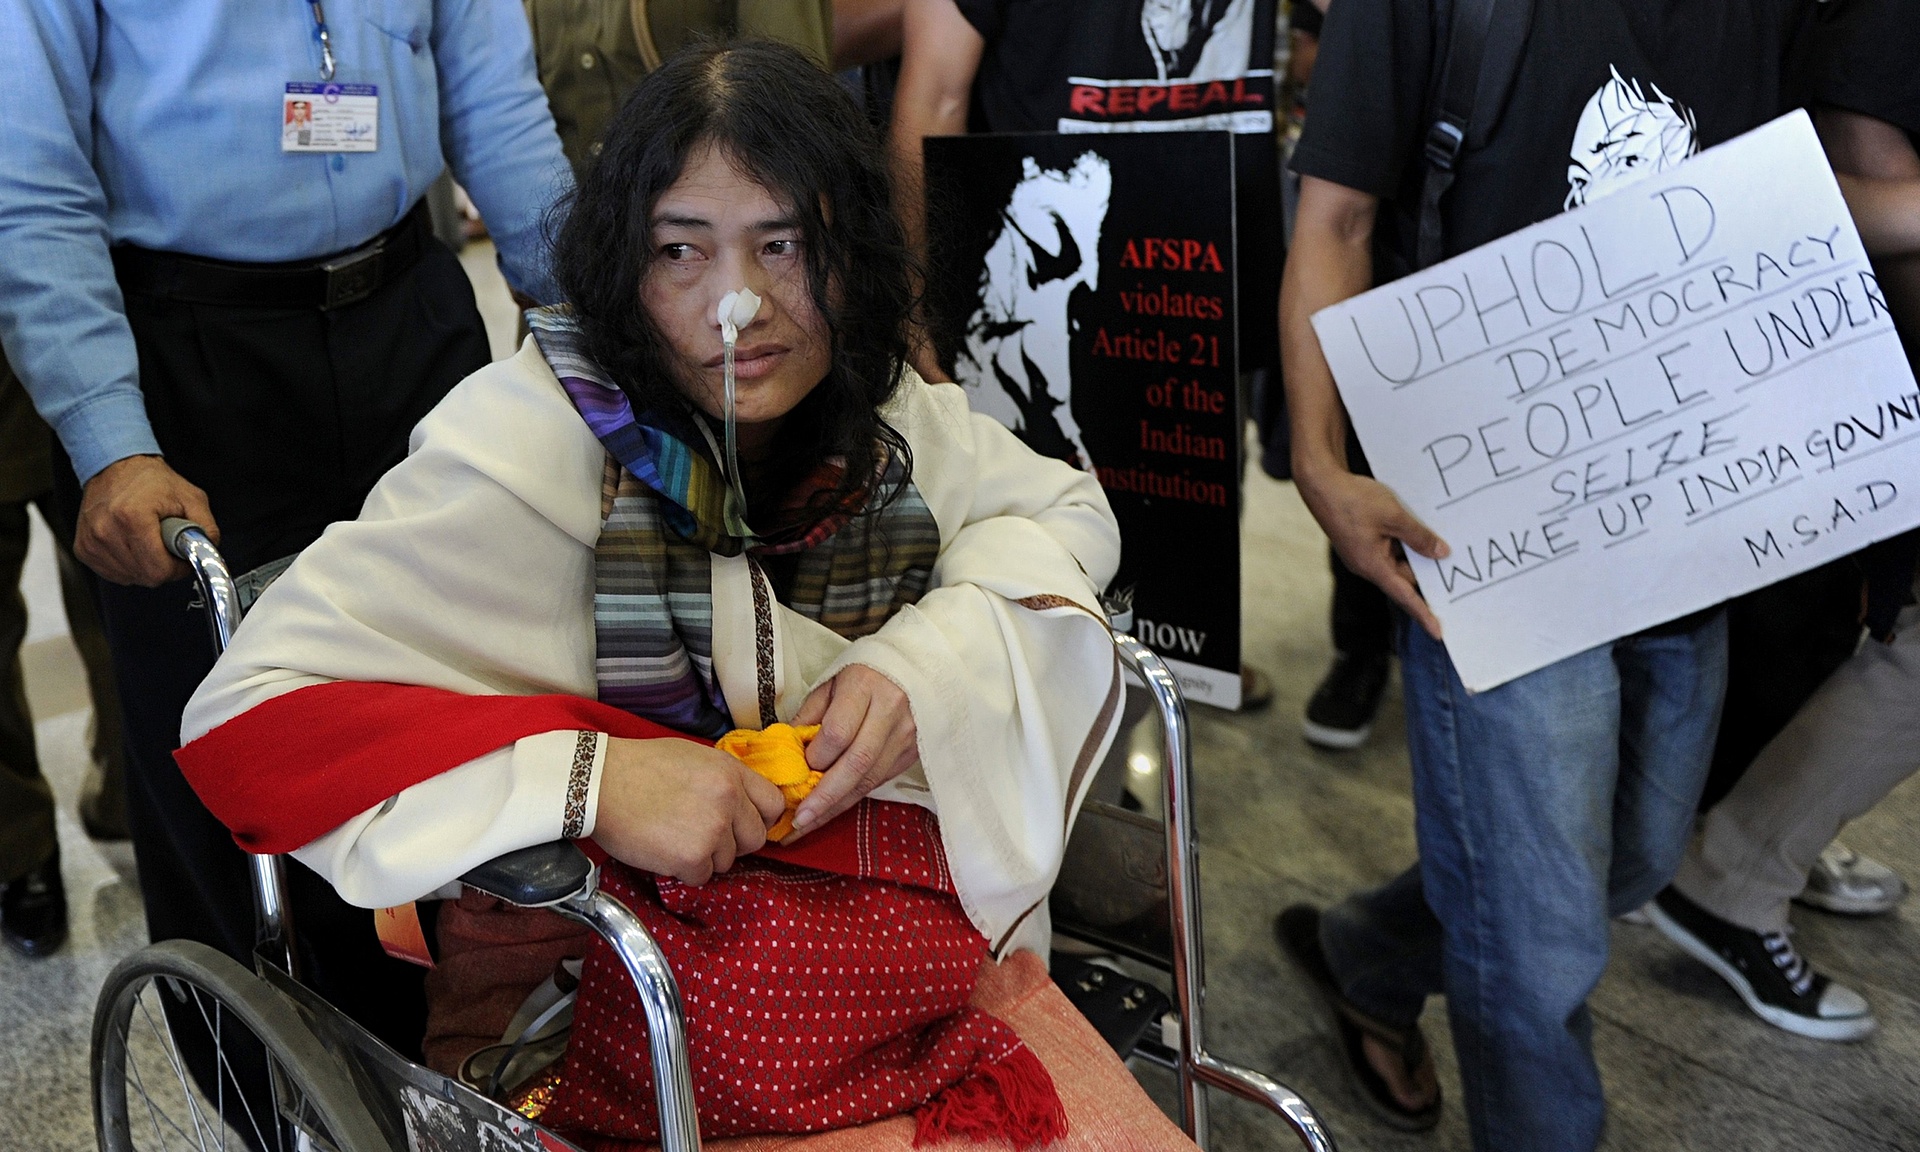 Irom Chanu Sharmila is reluctant to be in the spotlight for holding the longest hunger strike in history.